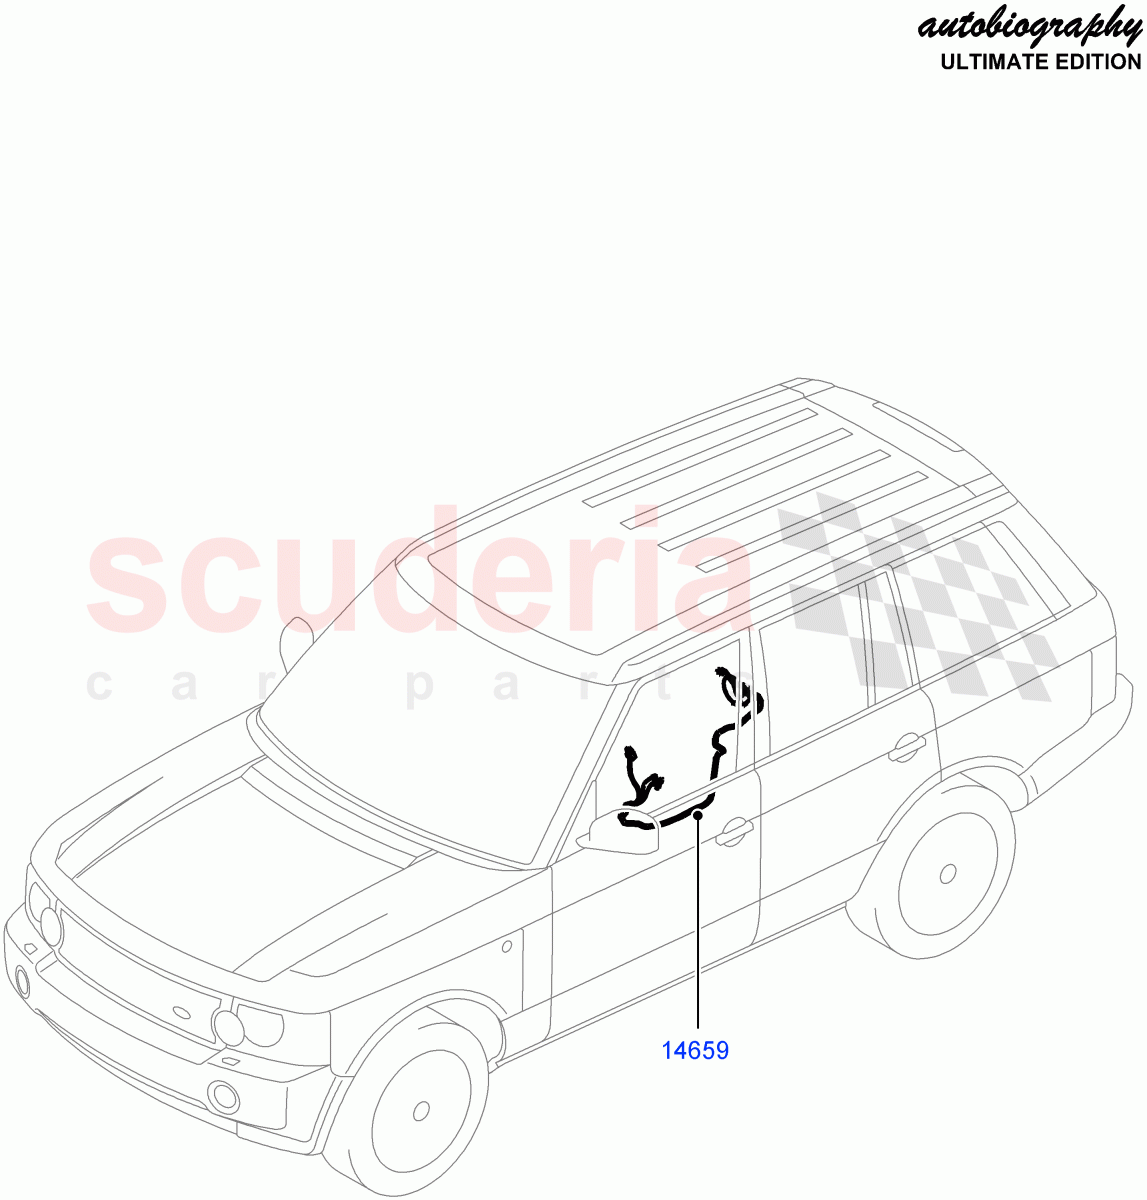 Wiring - Seats(Autobiography Ultimate Edition)((V)FROMBA344356) of Land Rover Land Rover Range Rover (2010-2012) [5.0 OHC SGDI SC V8 Petrol]